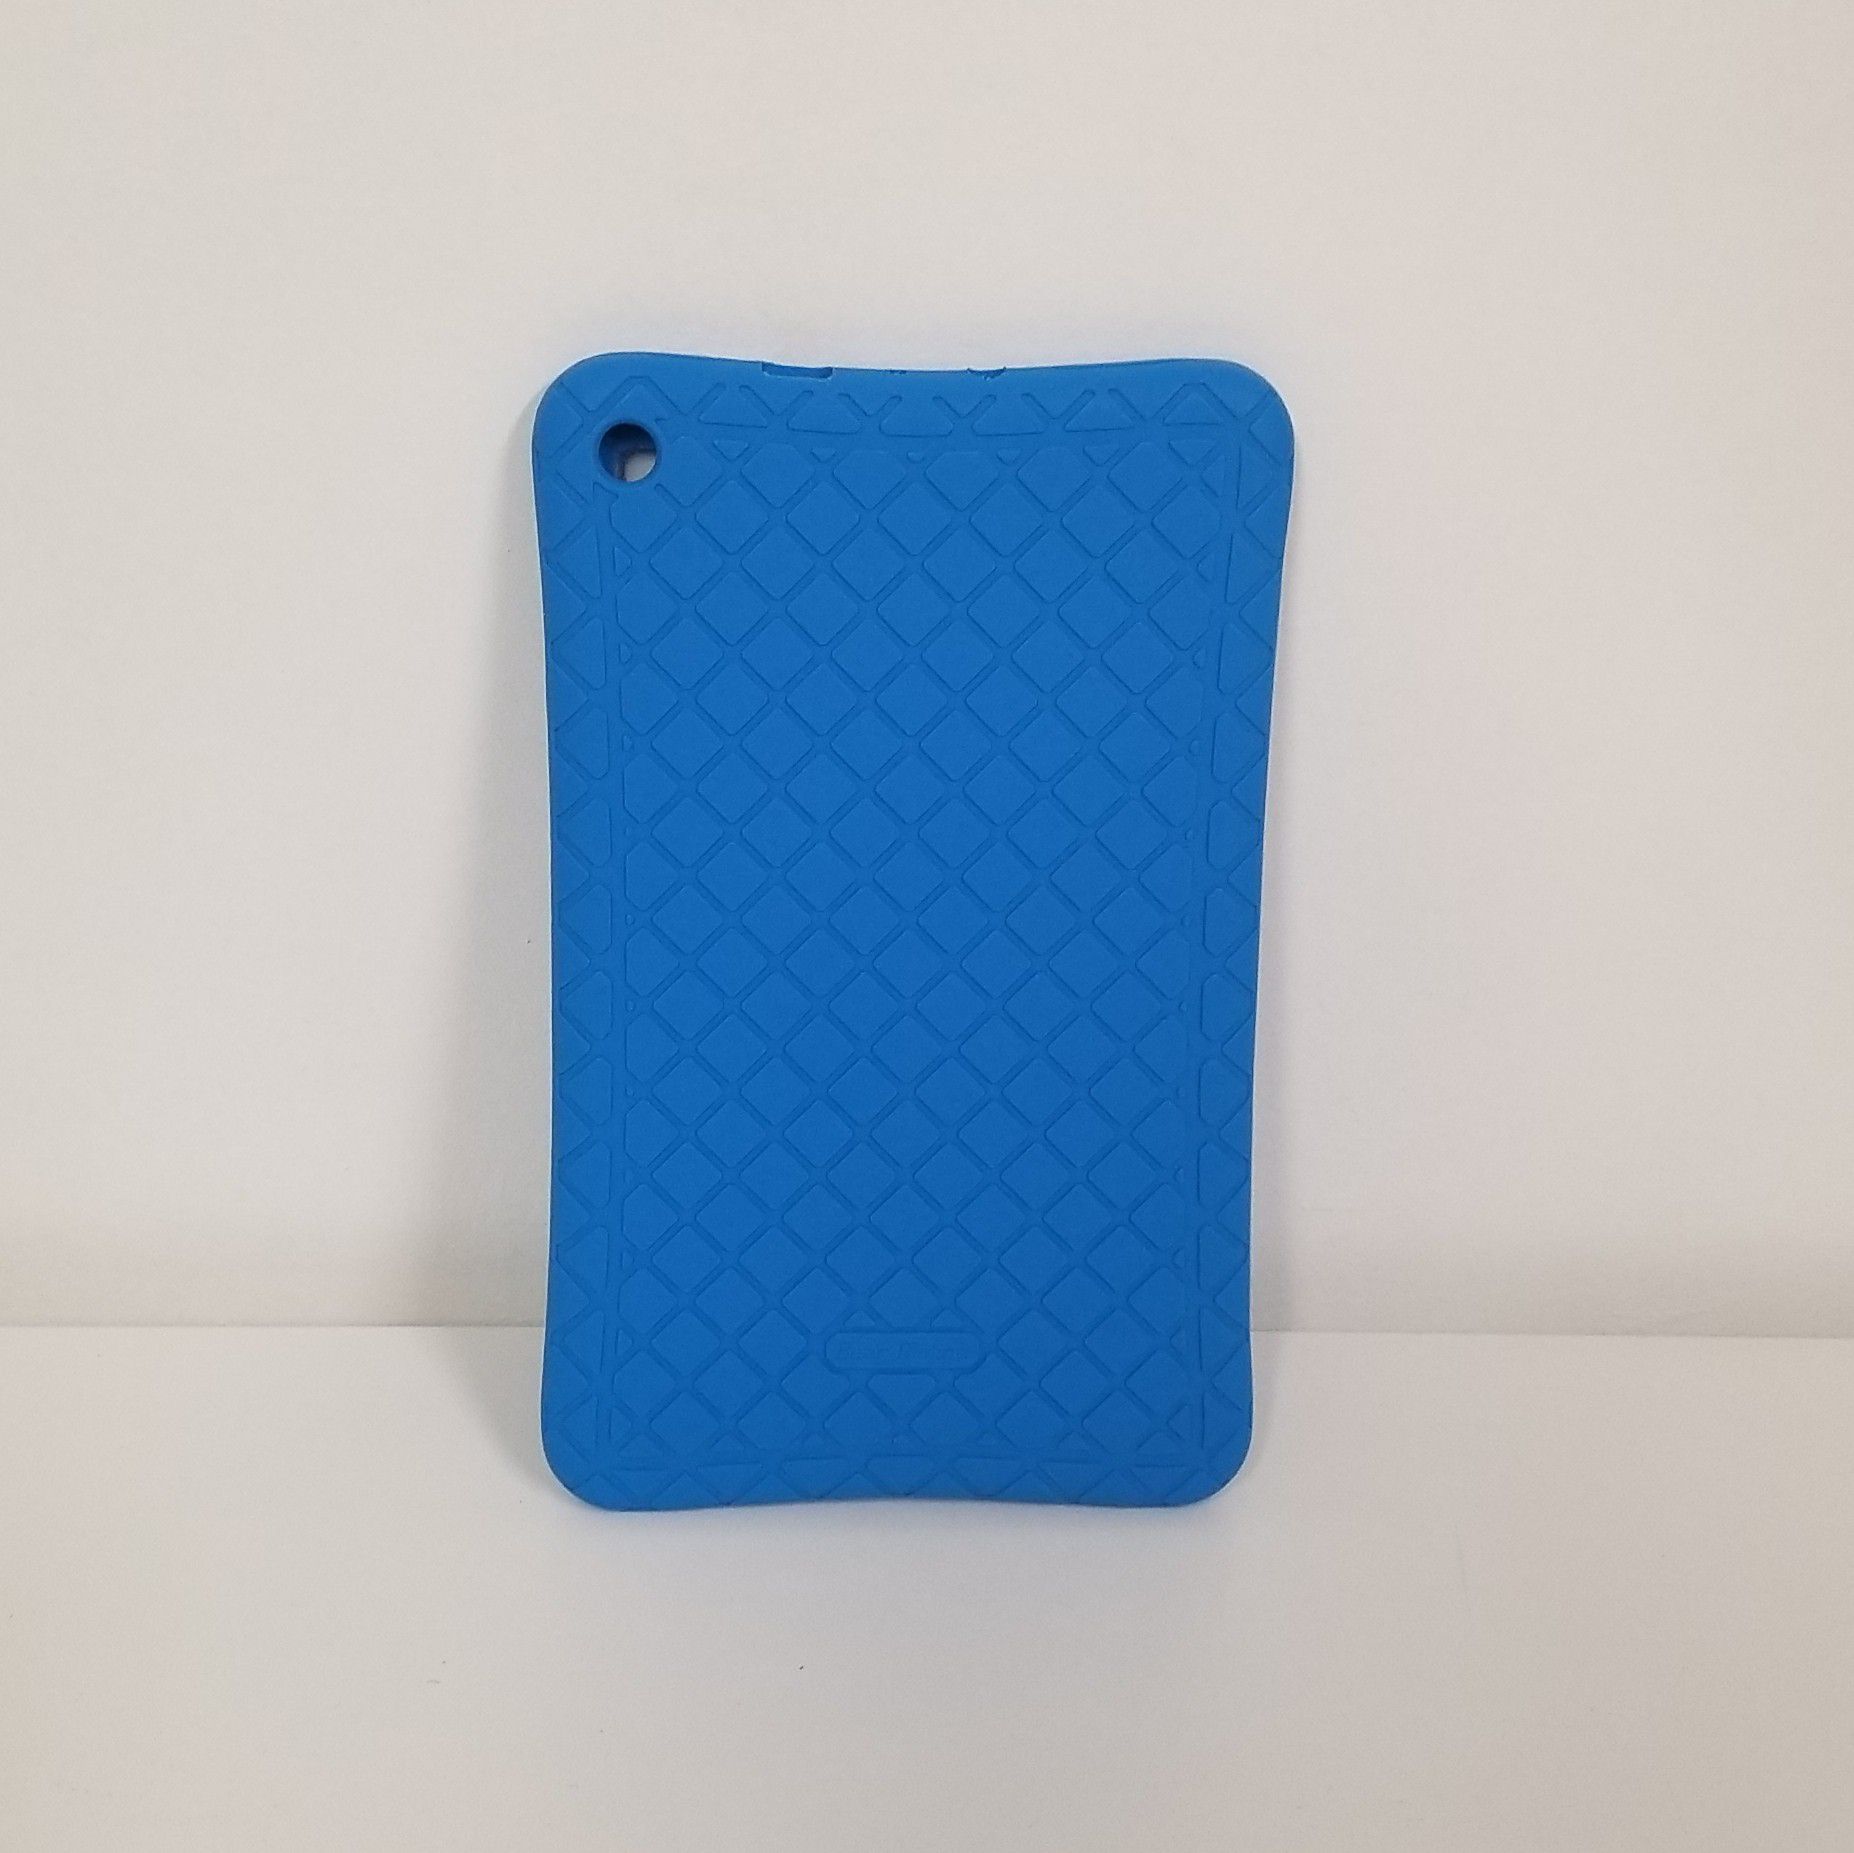 Amazon Fire Tablet Silicone Case